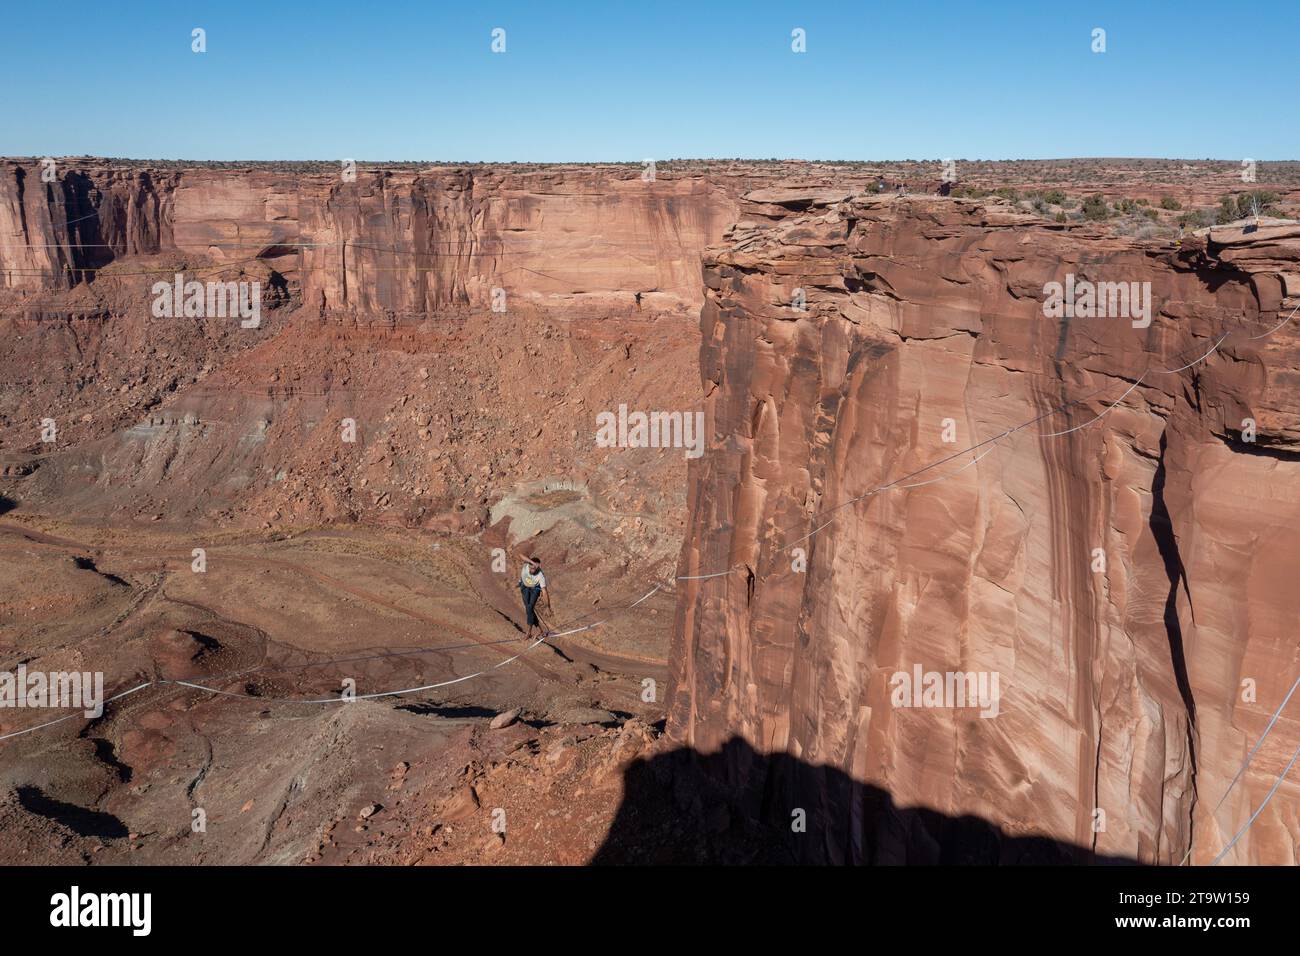 Aerial view of two people highlining 500 feet above the canyon floor at the GGBY Highline Festival near Moab, Utah. Stock Photo